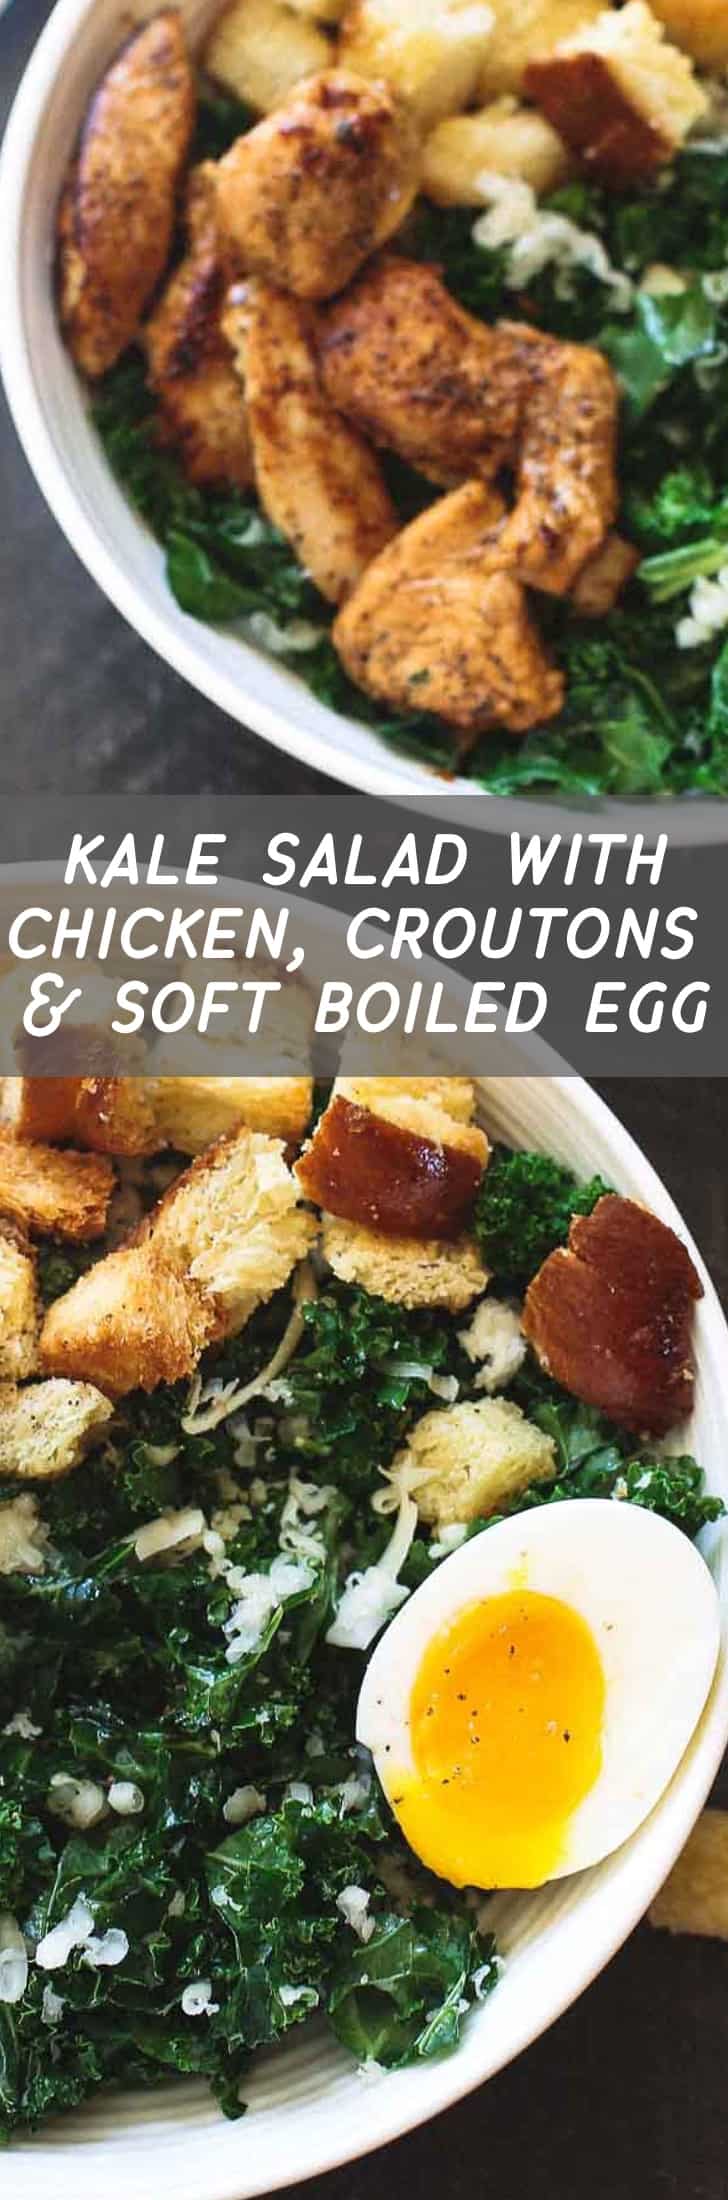 Kale Salad with Chicken, Croutons and Soft Boiled Eggs is packed with protein (24 grams if anyone’s counting), light enough for lunch with only 360 calories and filling enough for dinner. And full of so much flavor you’ll want it for both!